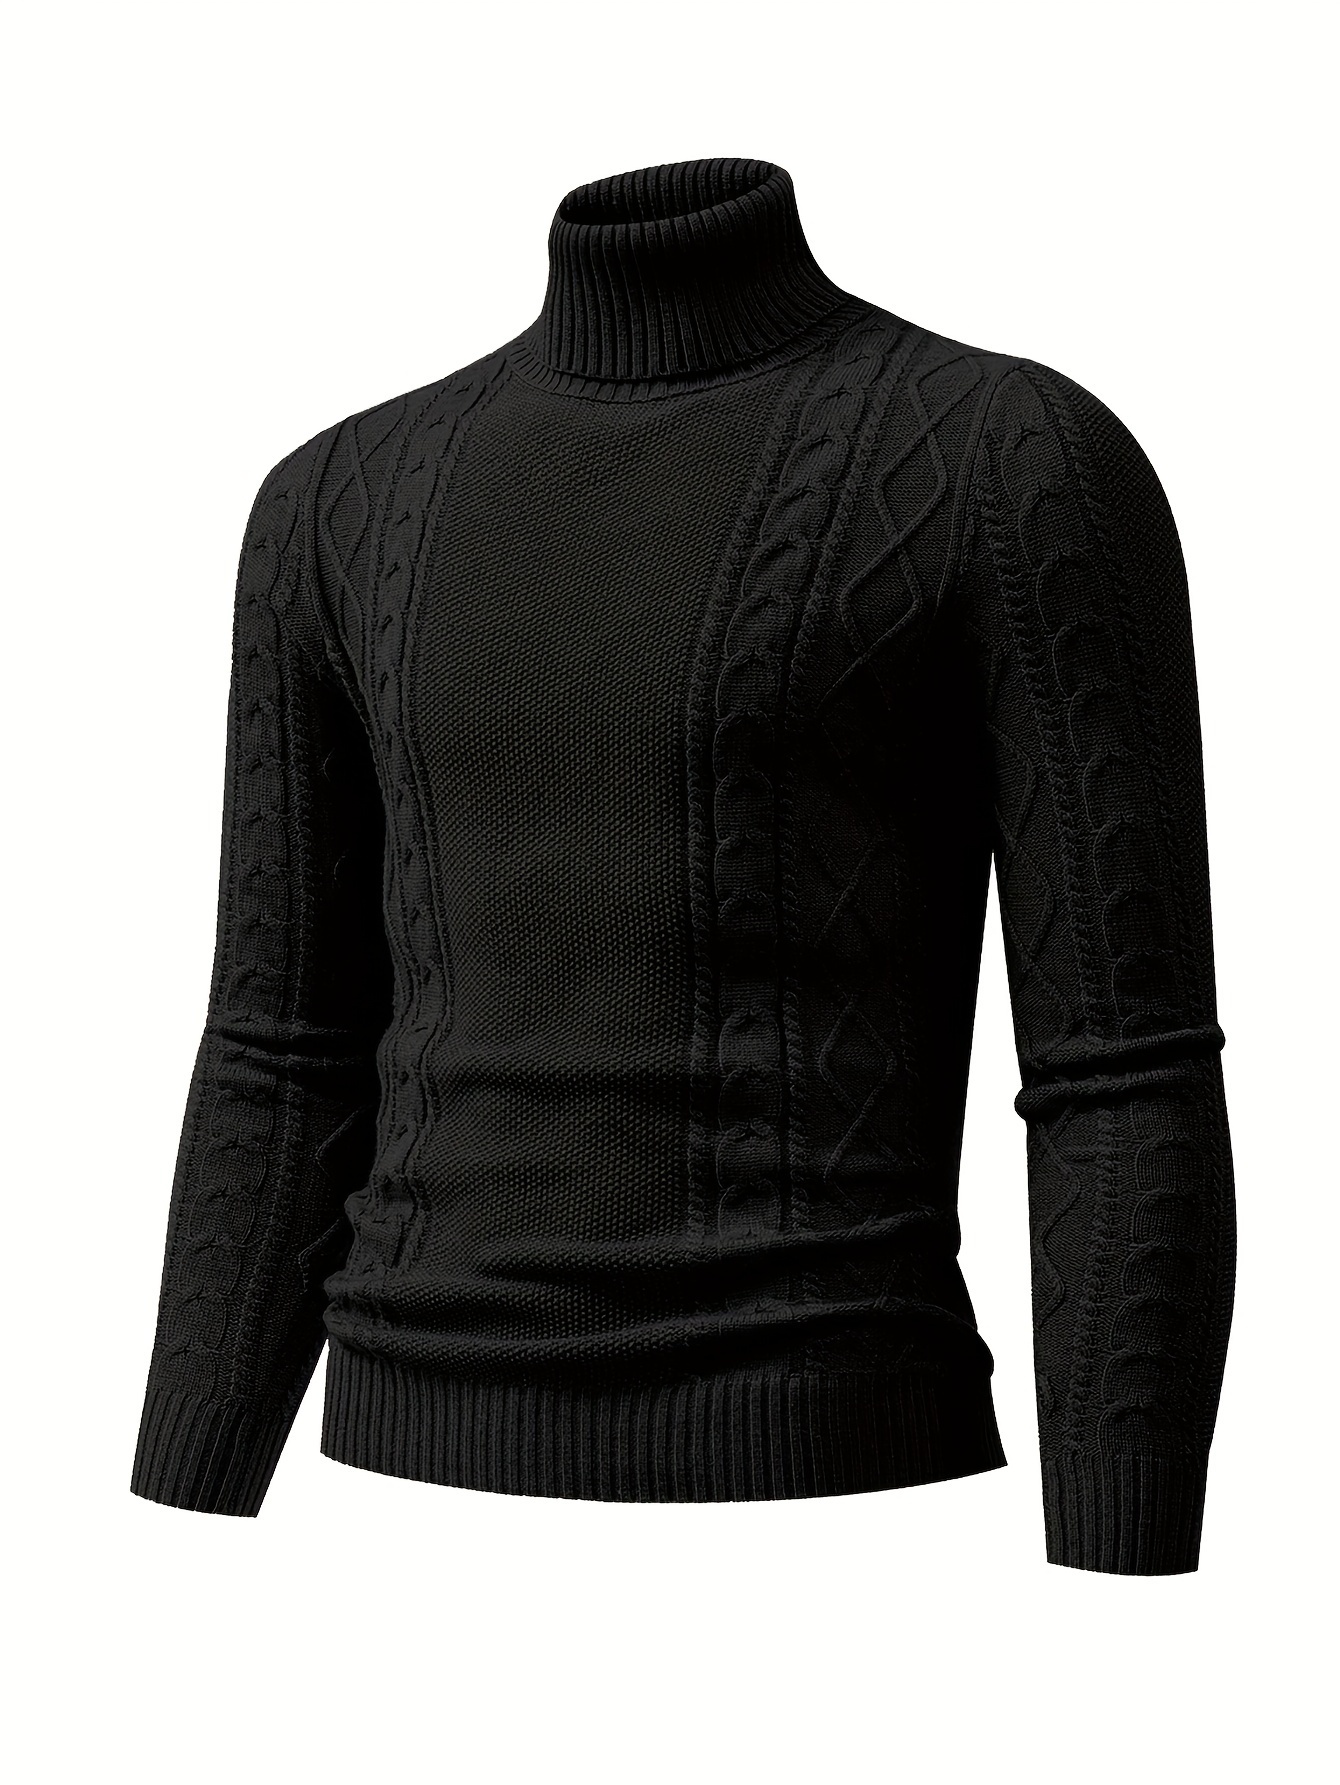 Men's Plain Turtleneck Sweater, Trendy High Stretch Fashion Comfy Thermal  Tops